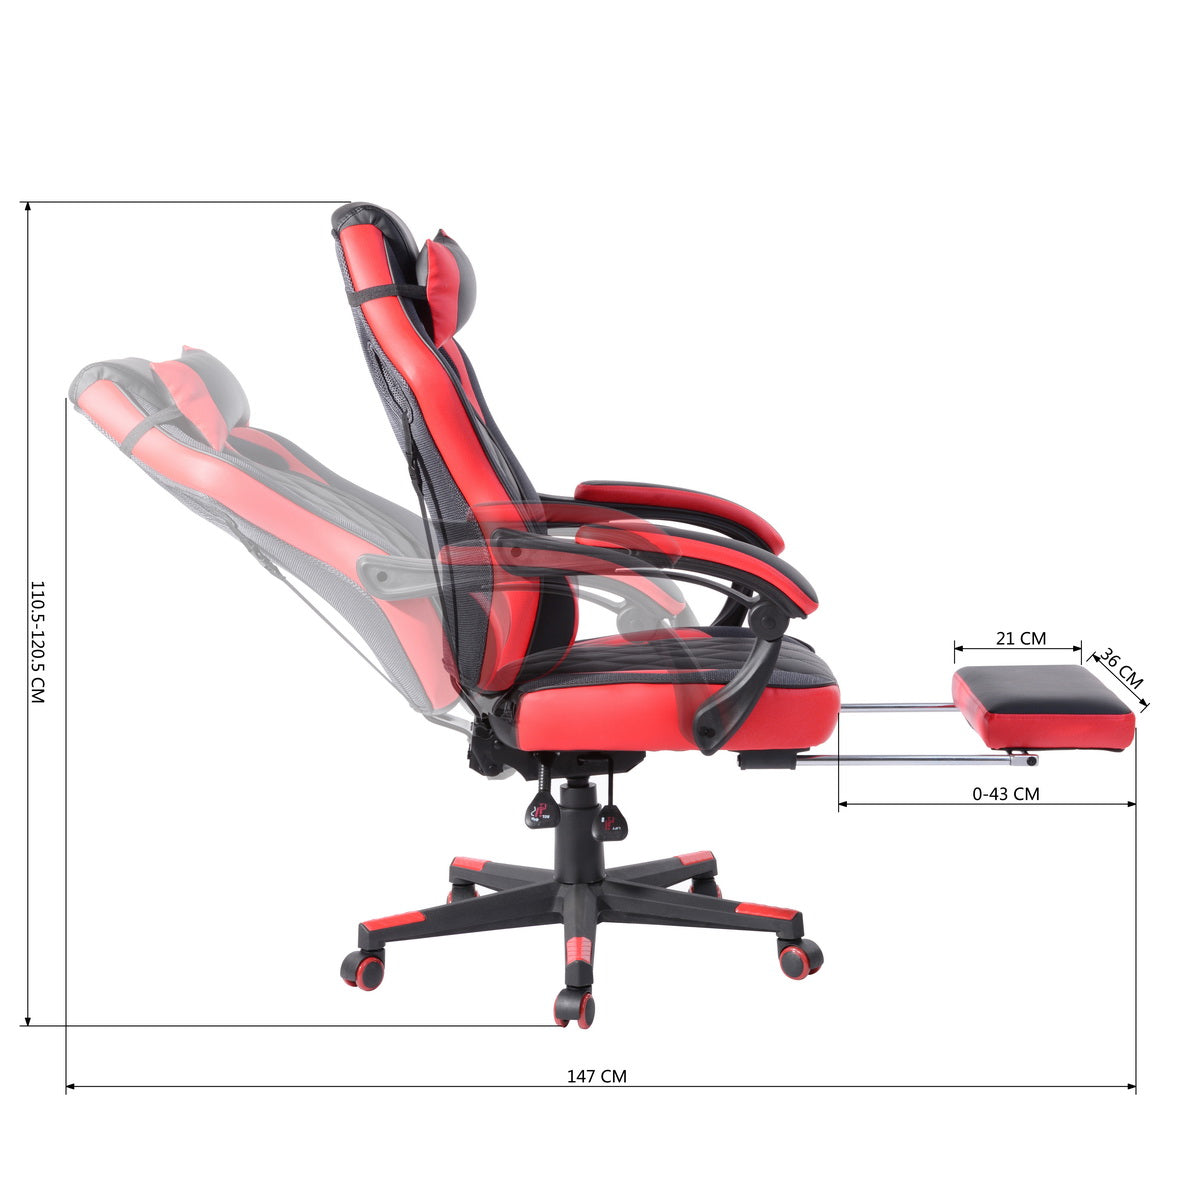 Upholstery PU Foldable Armrest Gaming Chair With Padded Handles with Butterfly Seat, Burgendy Red